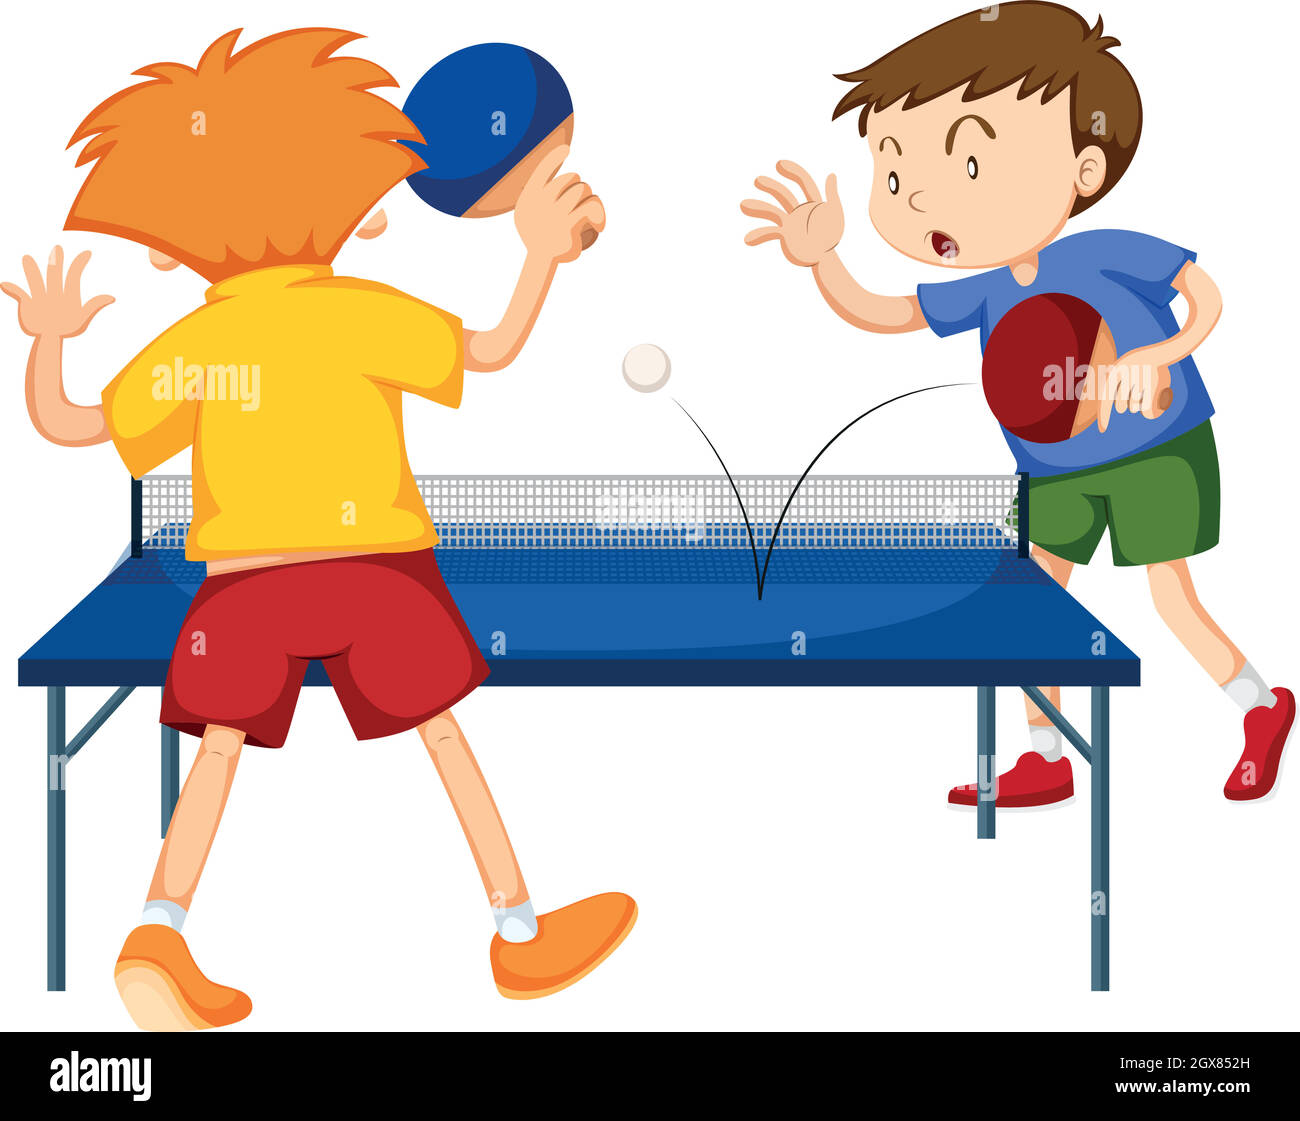 People playing table tennis Stock Vector